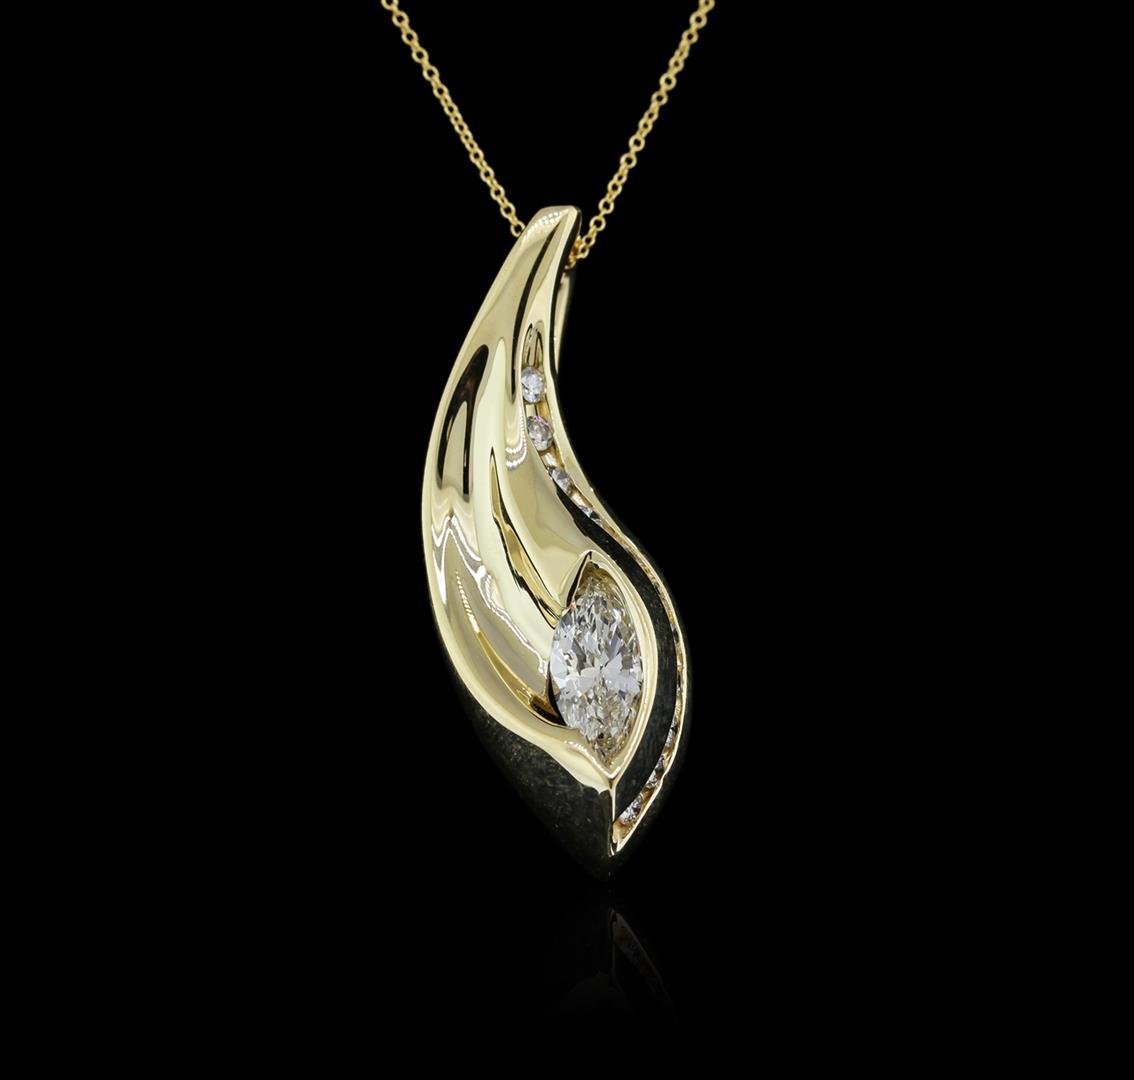 1.49 ctw Diamond Pendant With Chain - 14KT Yellow Gold